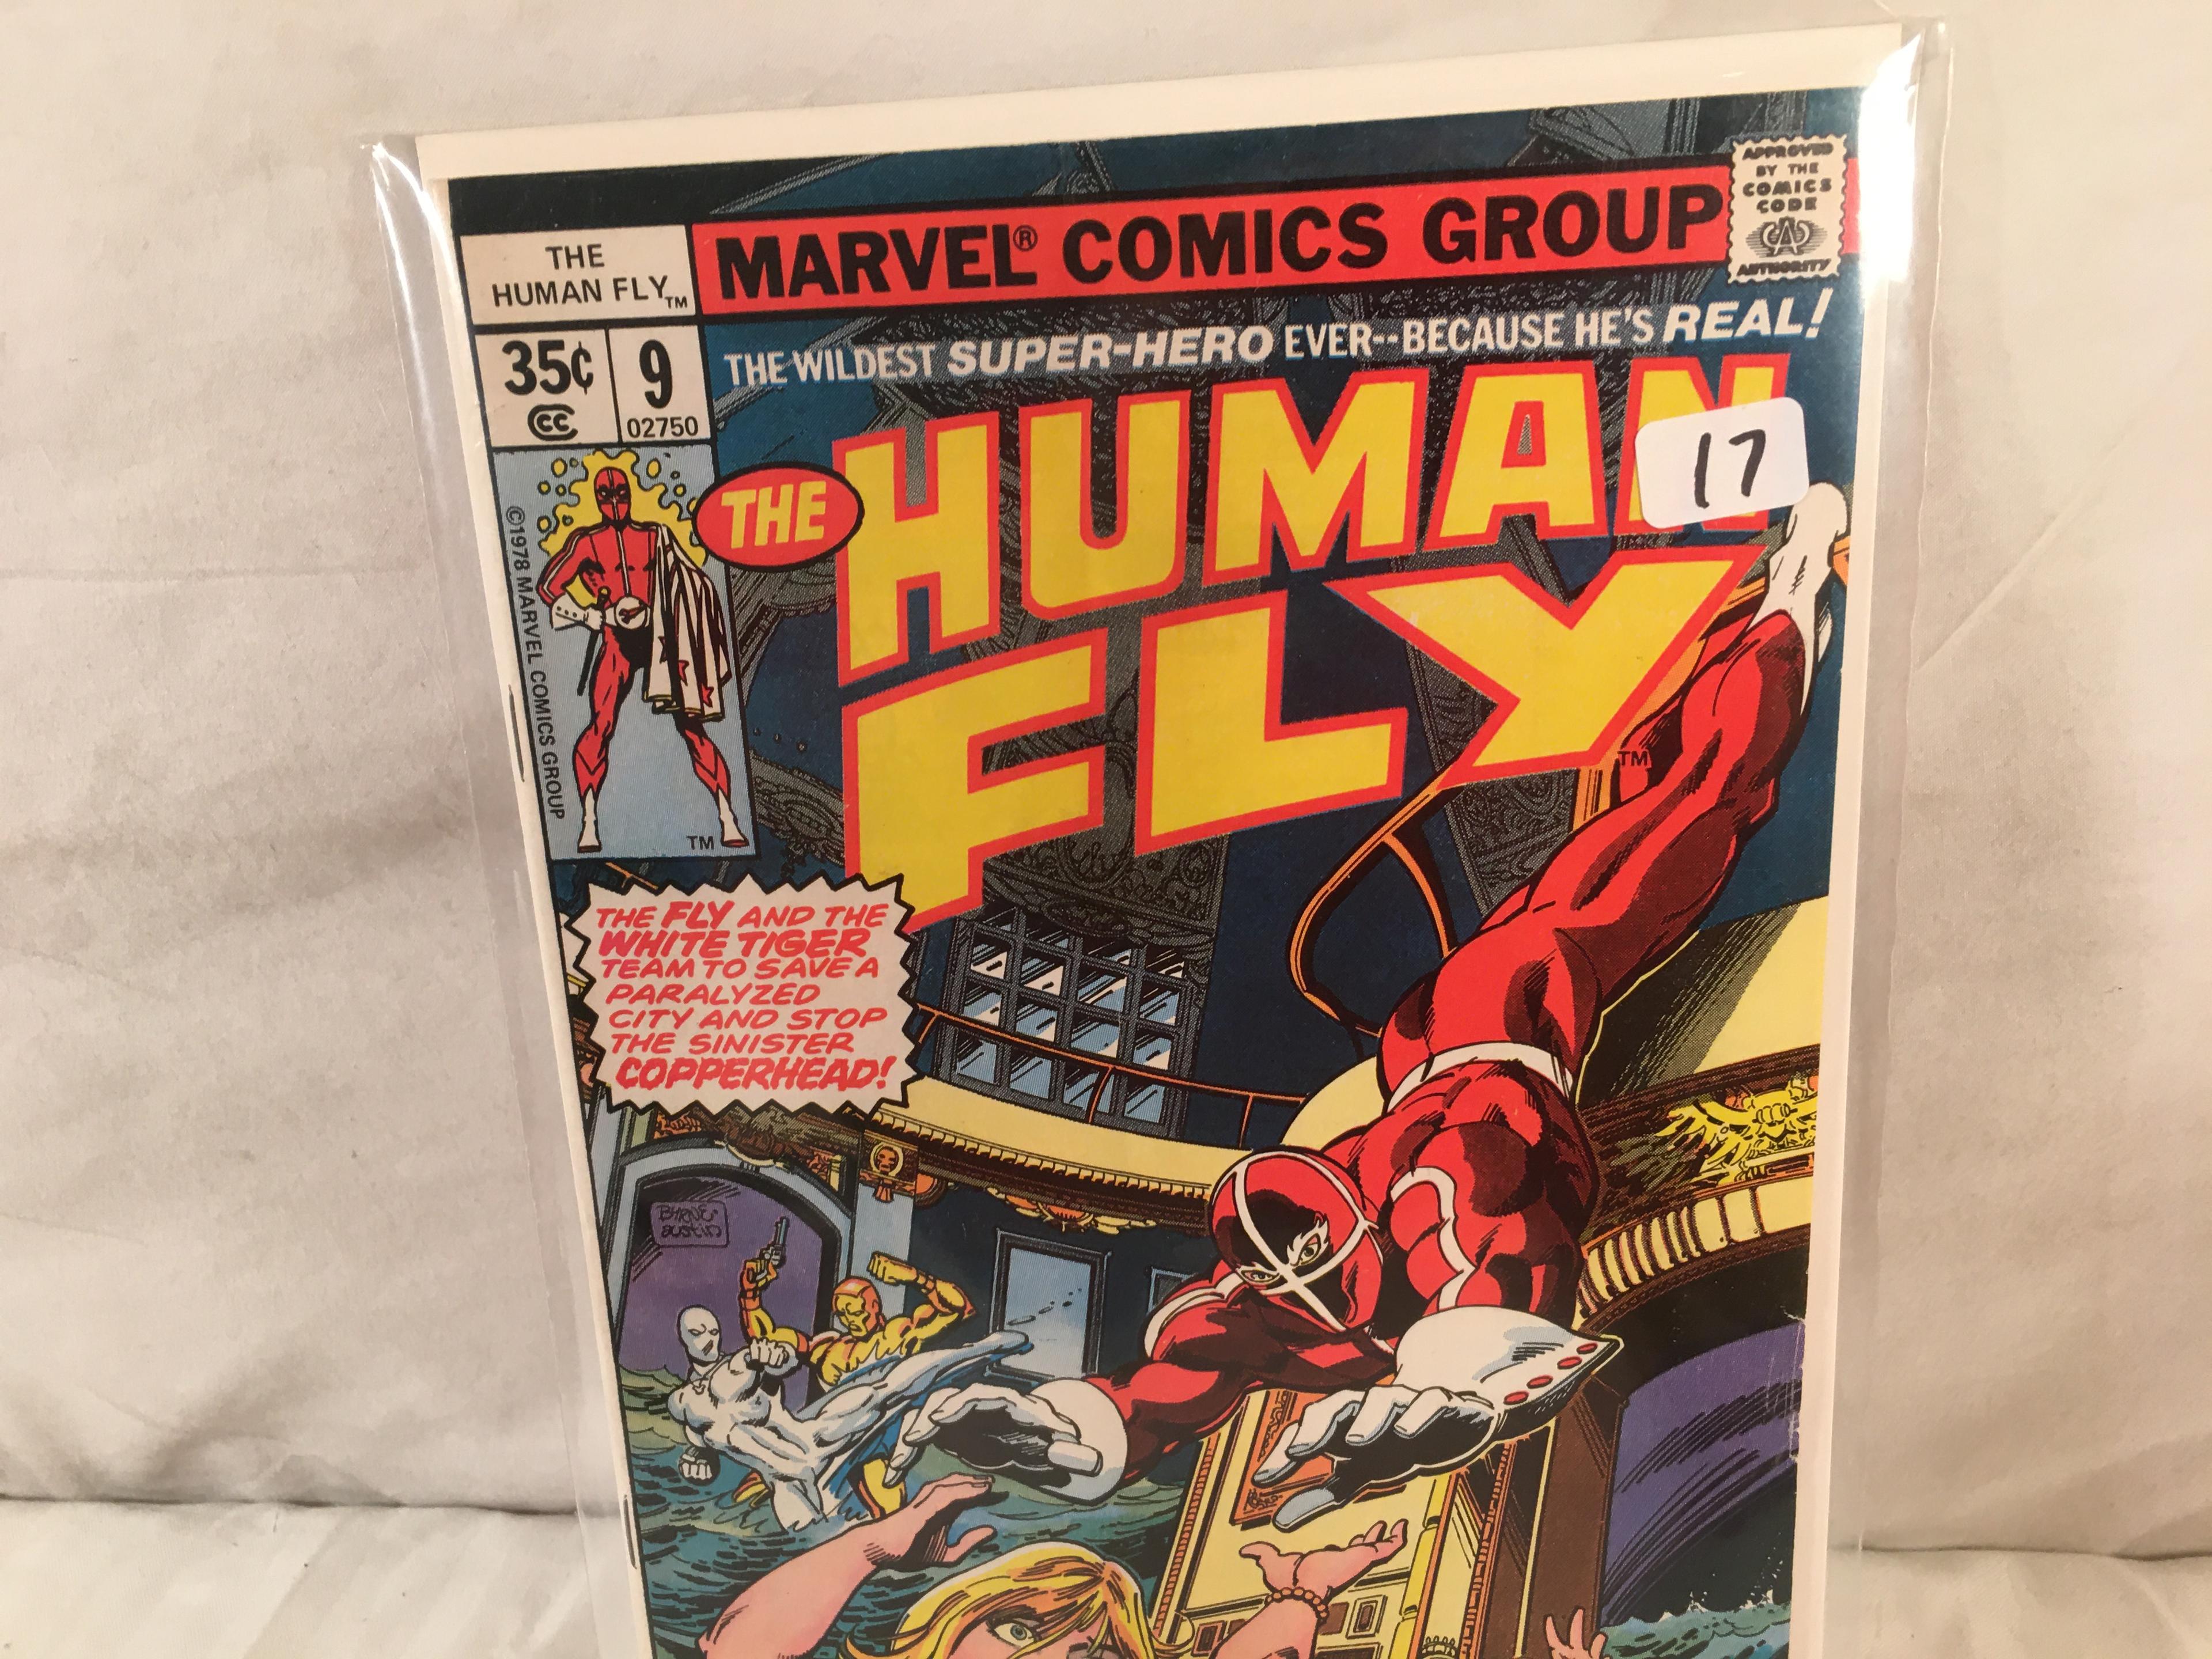 Collector Vintage Marvel Comics The Human Fly Doomsday Dawns At Night Comic Book No. 9